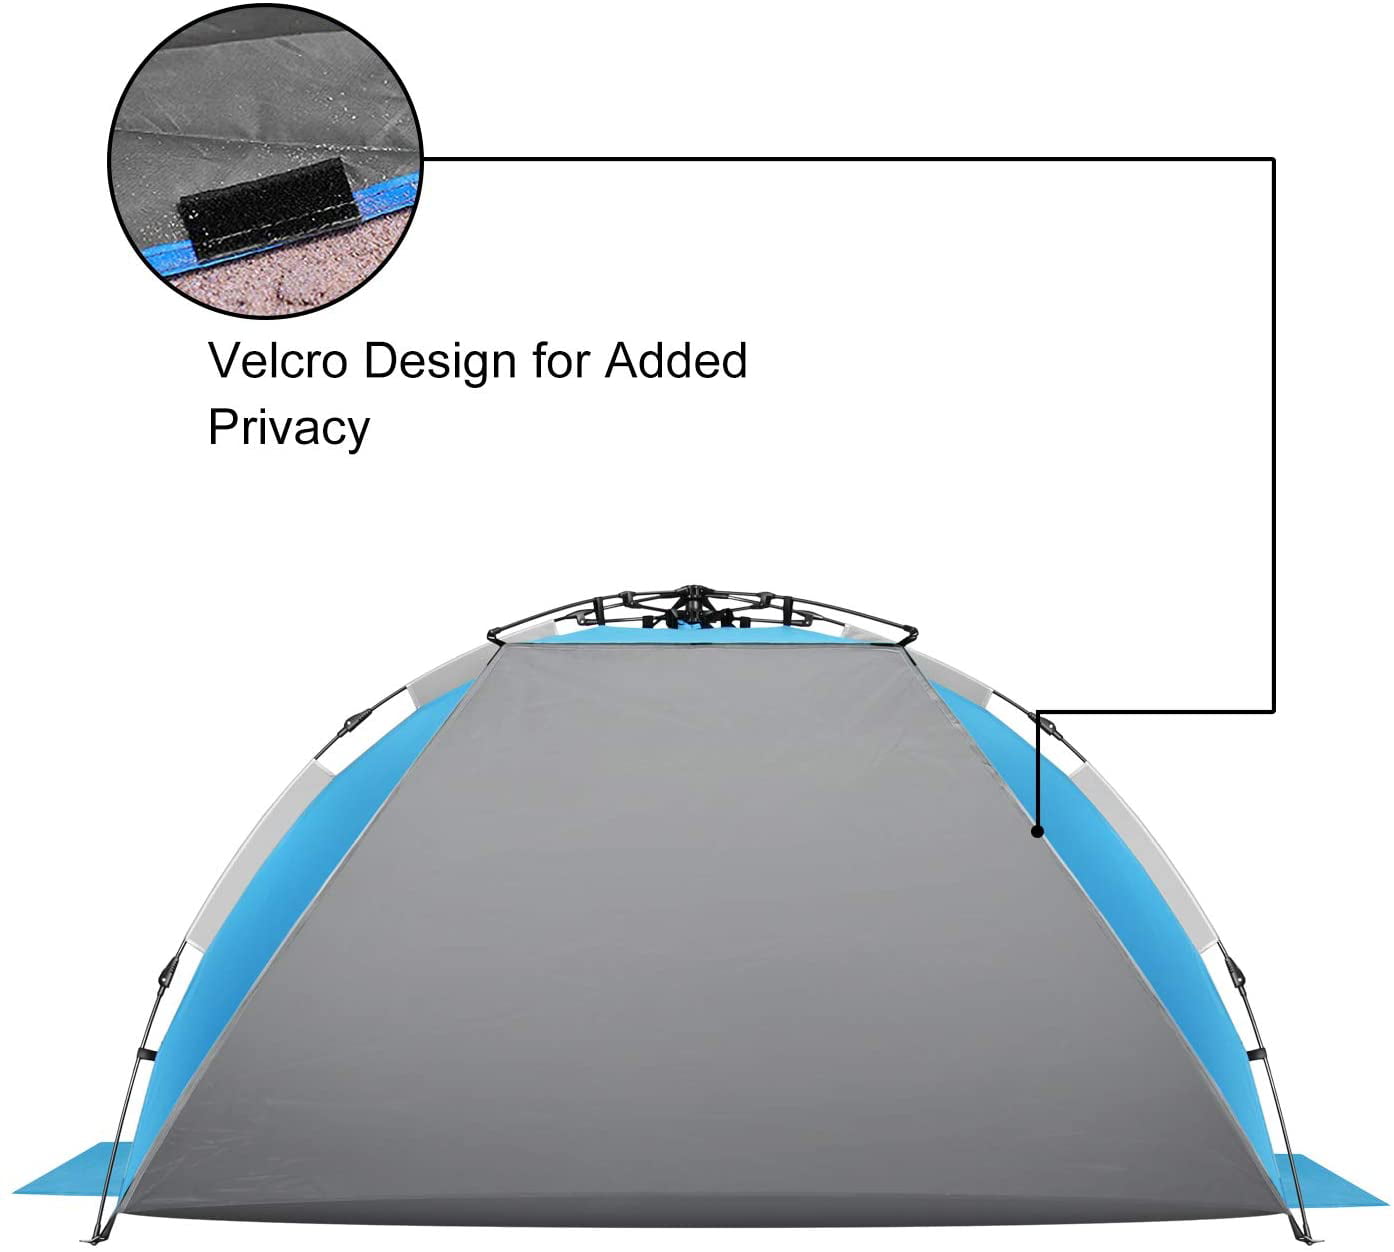 Oileus Beach Tent X-Large 4 Person Tent Sun Shelter， Pop Up Tents， Portable Sun Shade for Beach with Carry Bag， Stakes， 6 Sand Pockets， Anti UV for Fishing Hiking Camping， Waterproof， Windproof， Blue